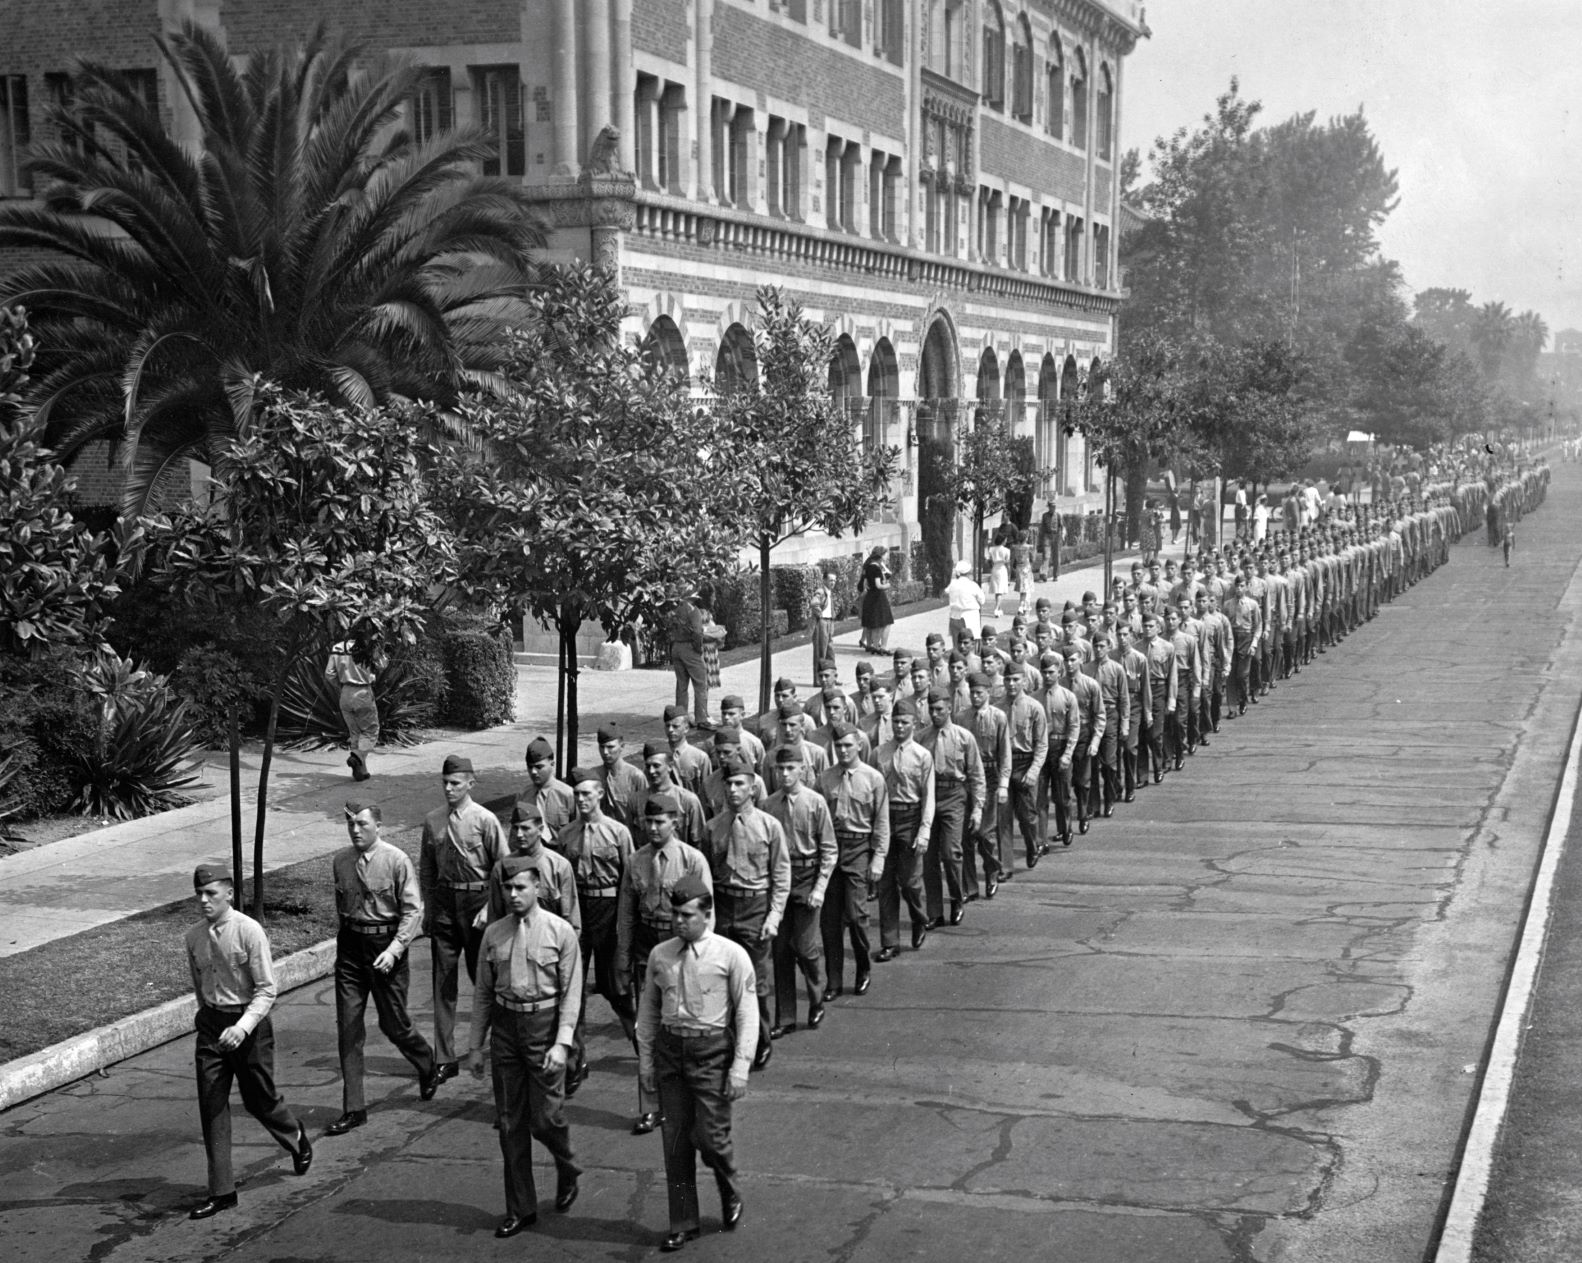 Military men marching